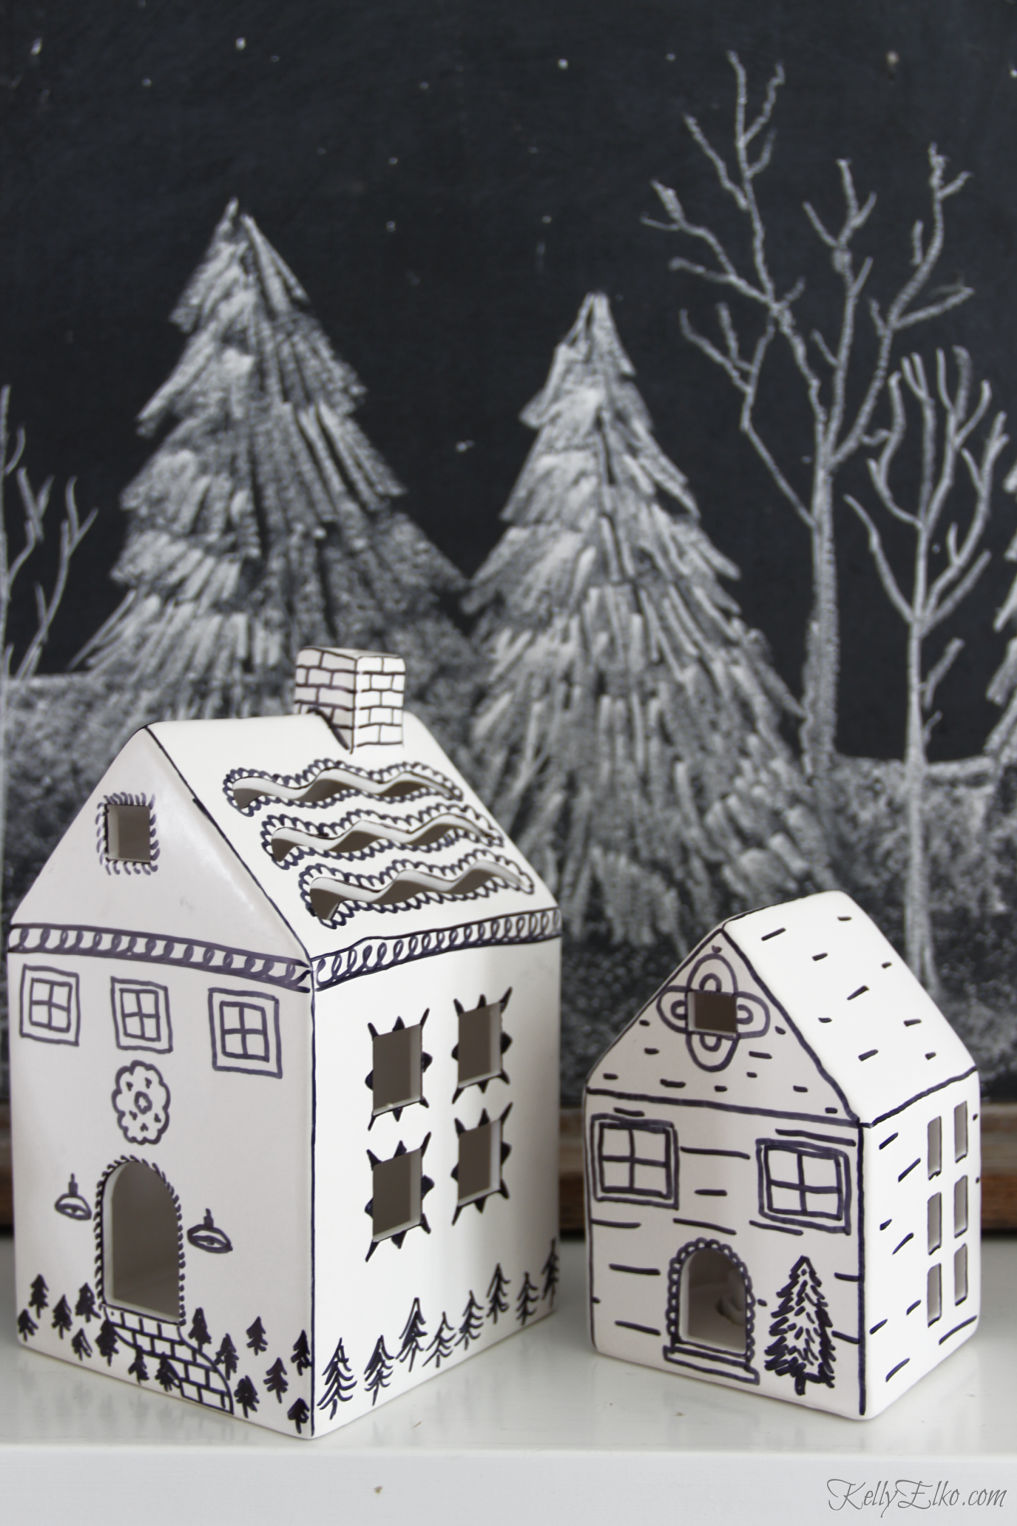 How to Make Ceramic Doodle Houses - she has great tips and tricks and exquisite examples! kellyelko.com #christmas #christmascrafts #diychristmas #doodle #sharpiecrafts #ceramichouses #crafting #kidscrafts #diyideas #crafting #art 